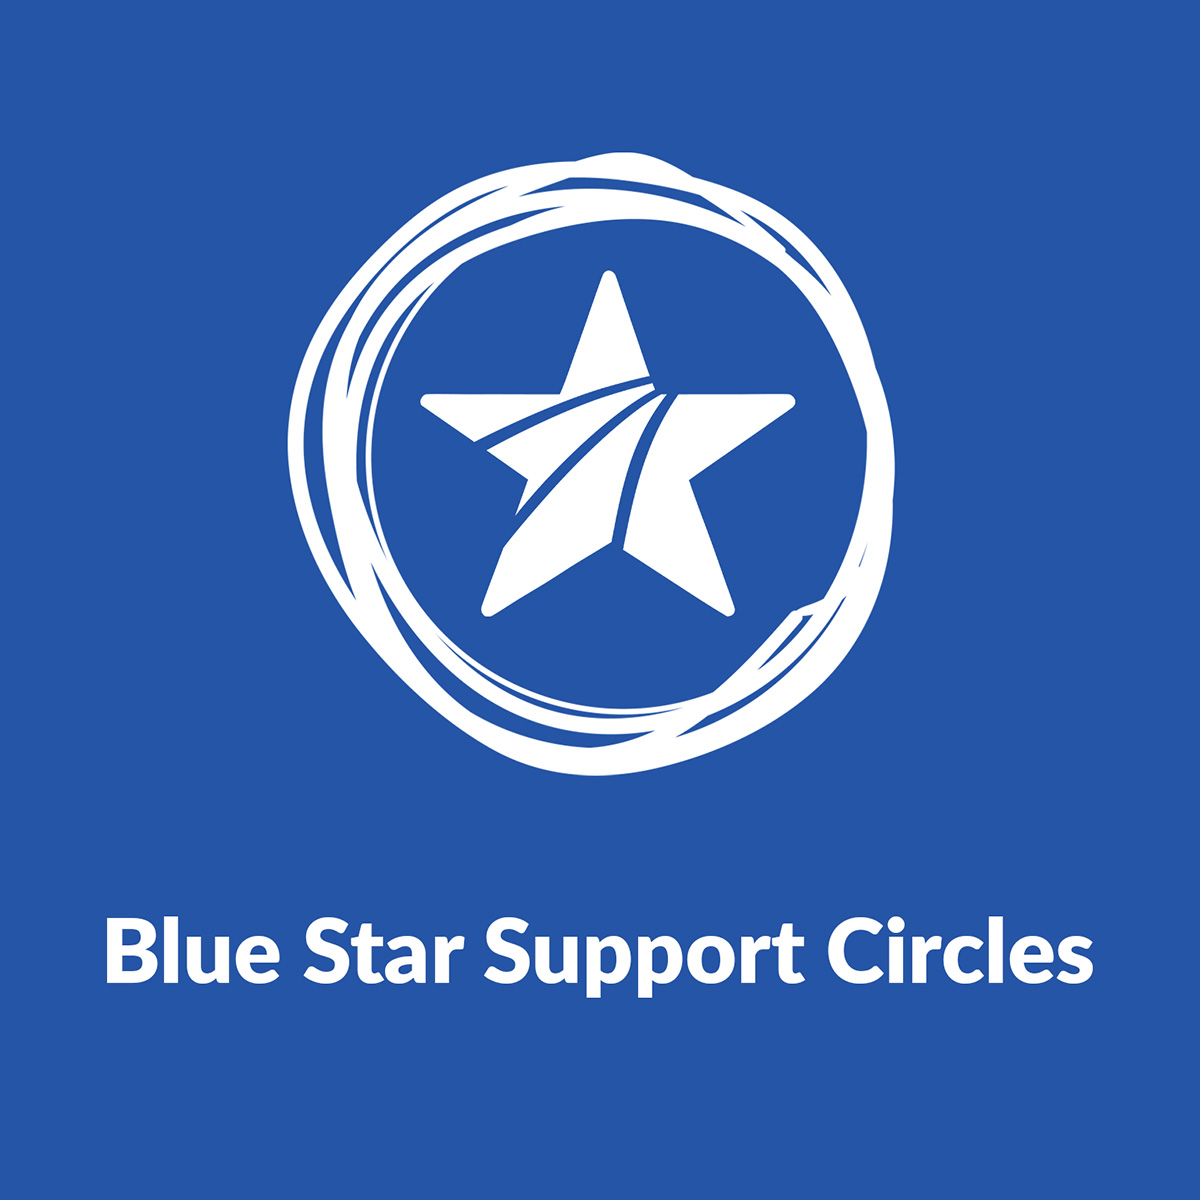 BSF_SupportCircles_1200x1200_Toolkit_Tiles-BSSC